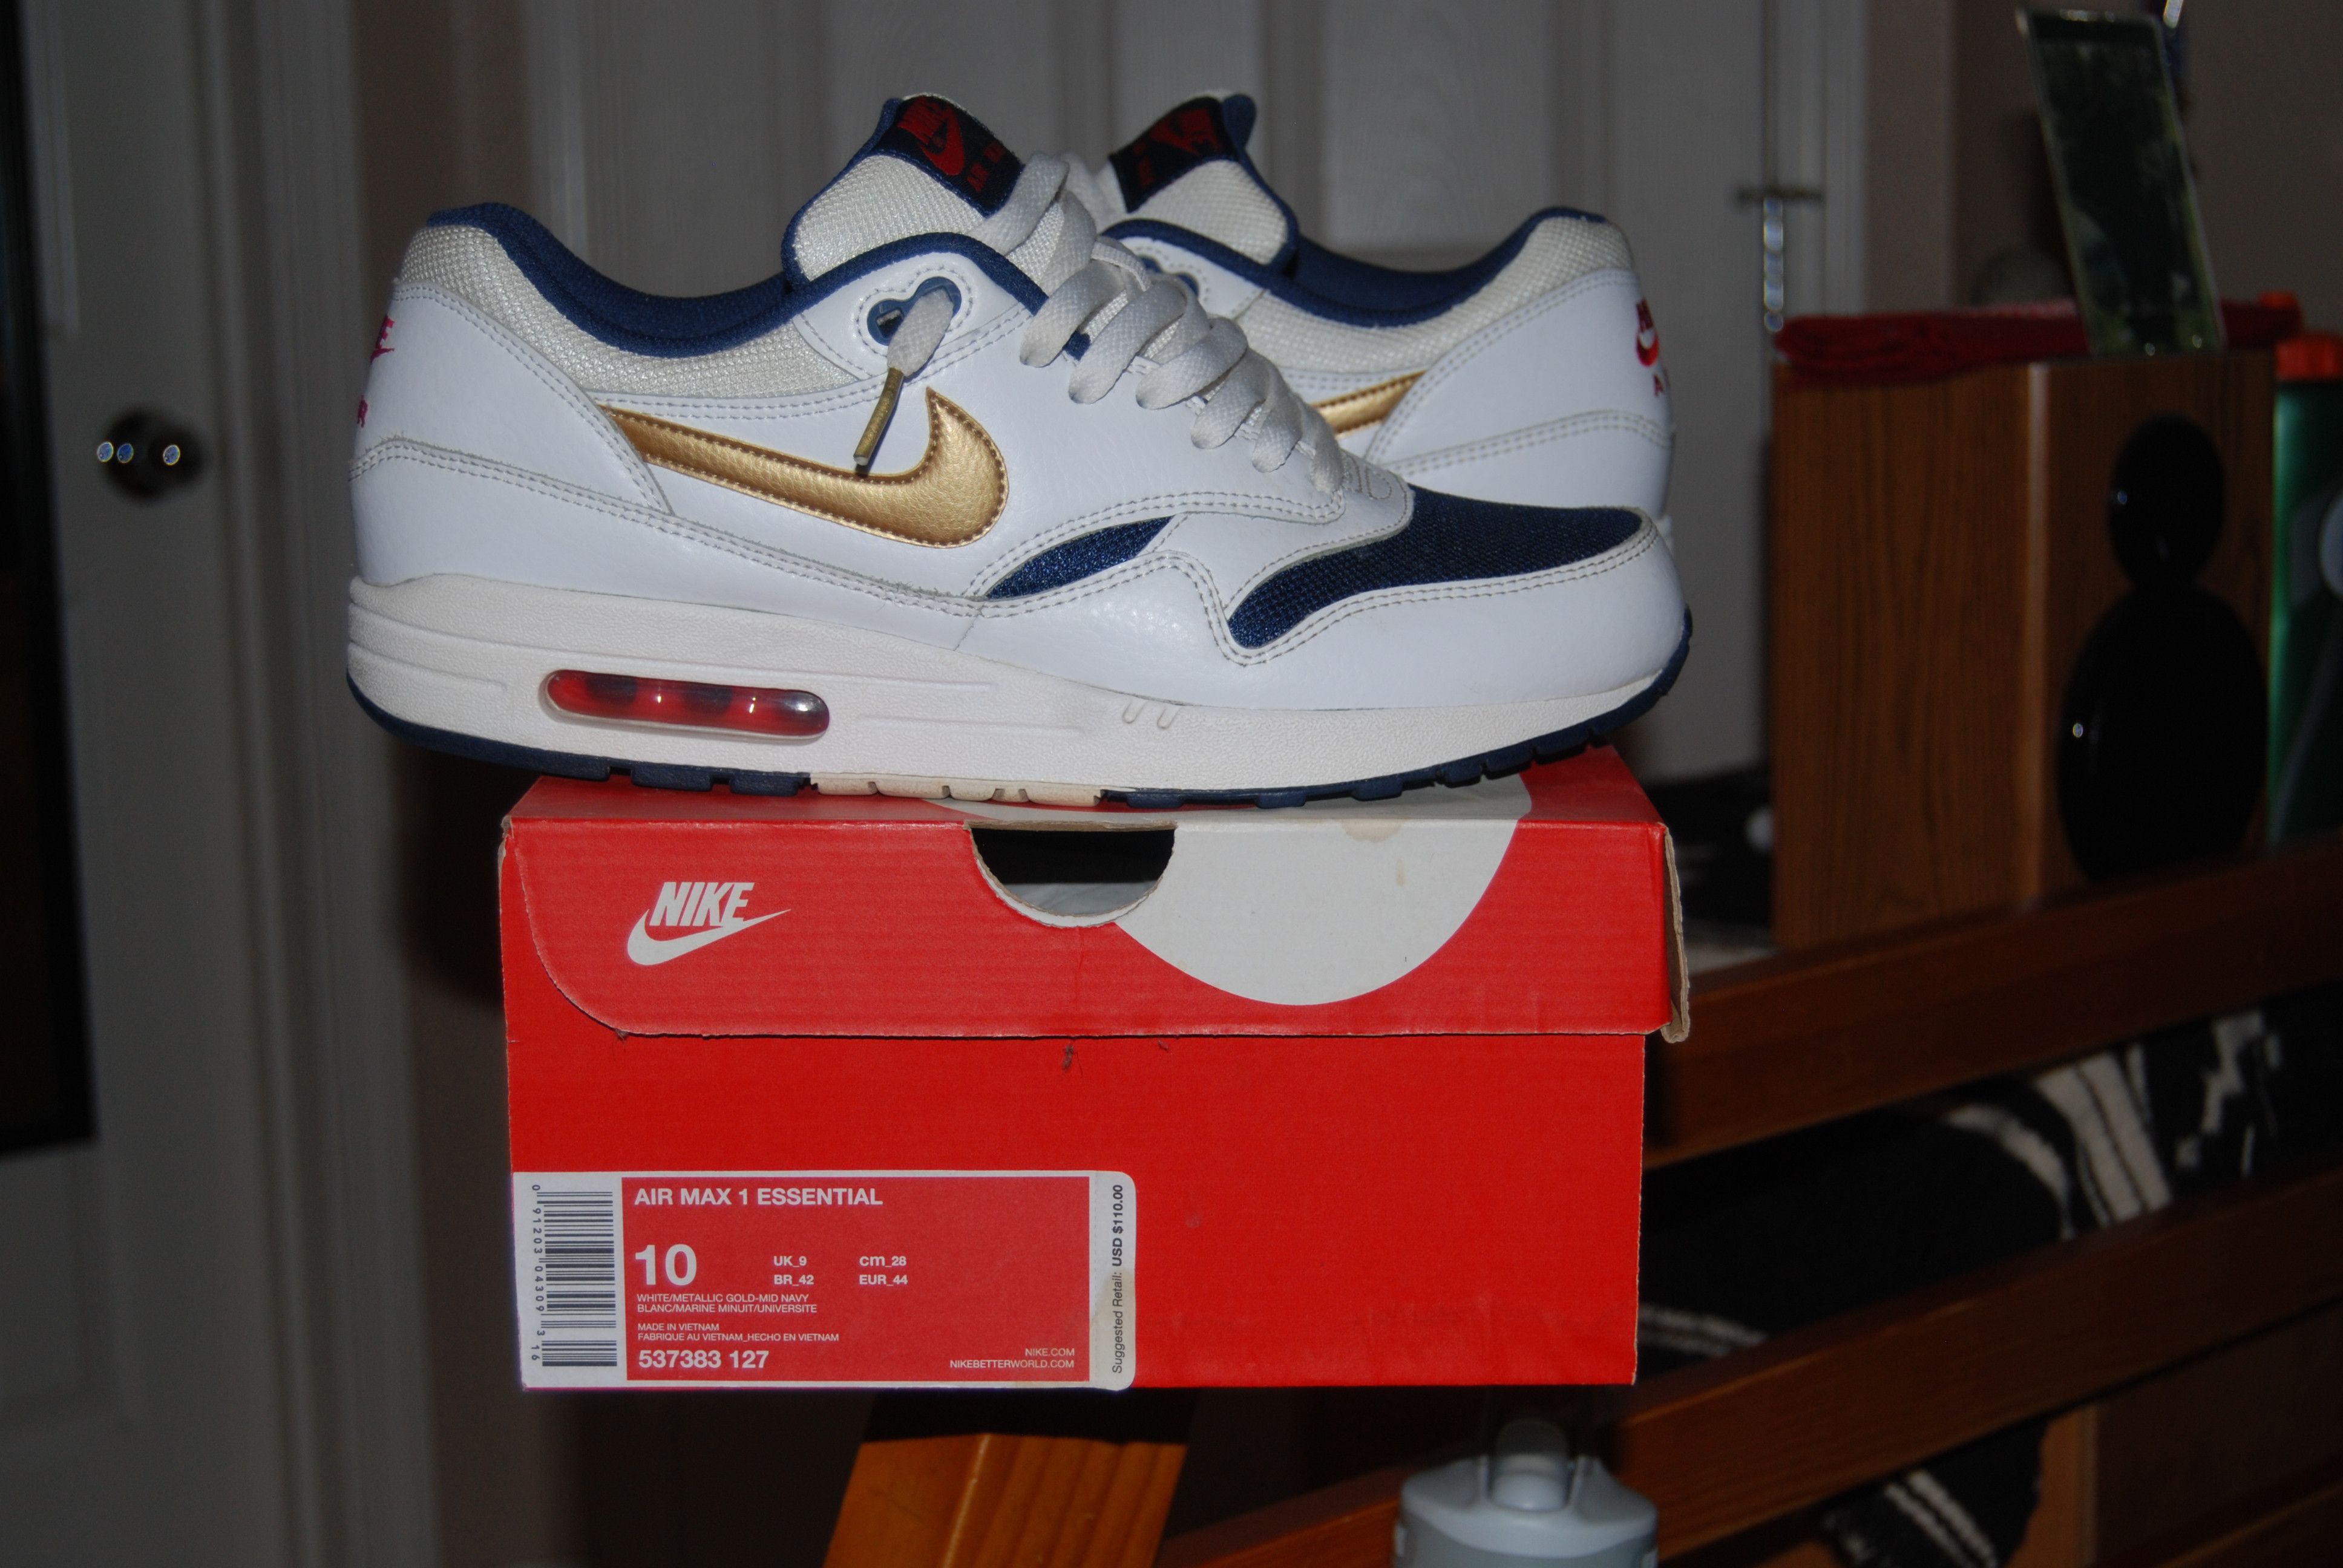 Nike Air Max 1 Essential Olympic Size US 10 / EU 43 - 2 Preview